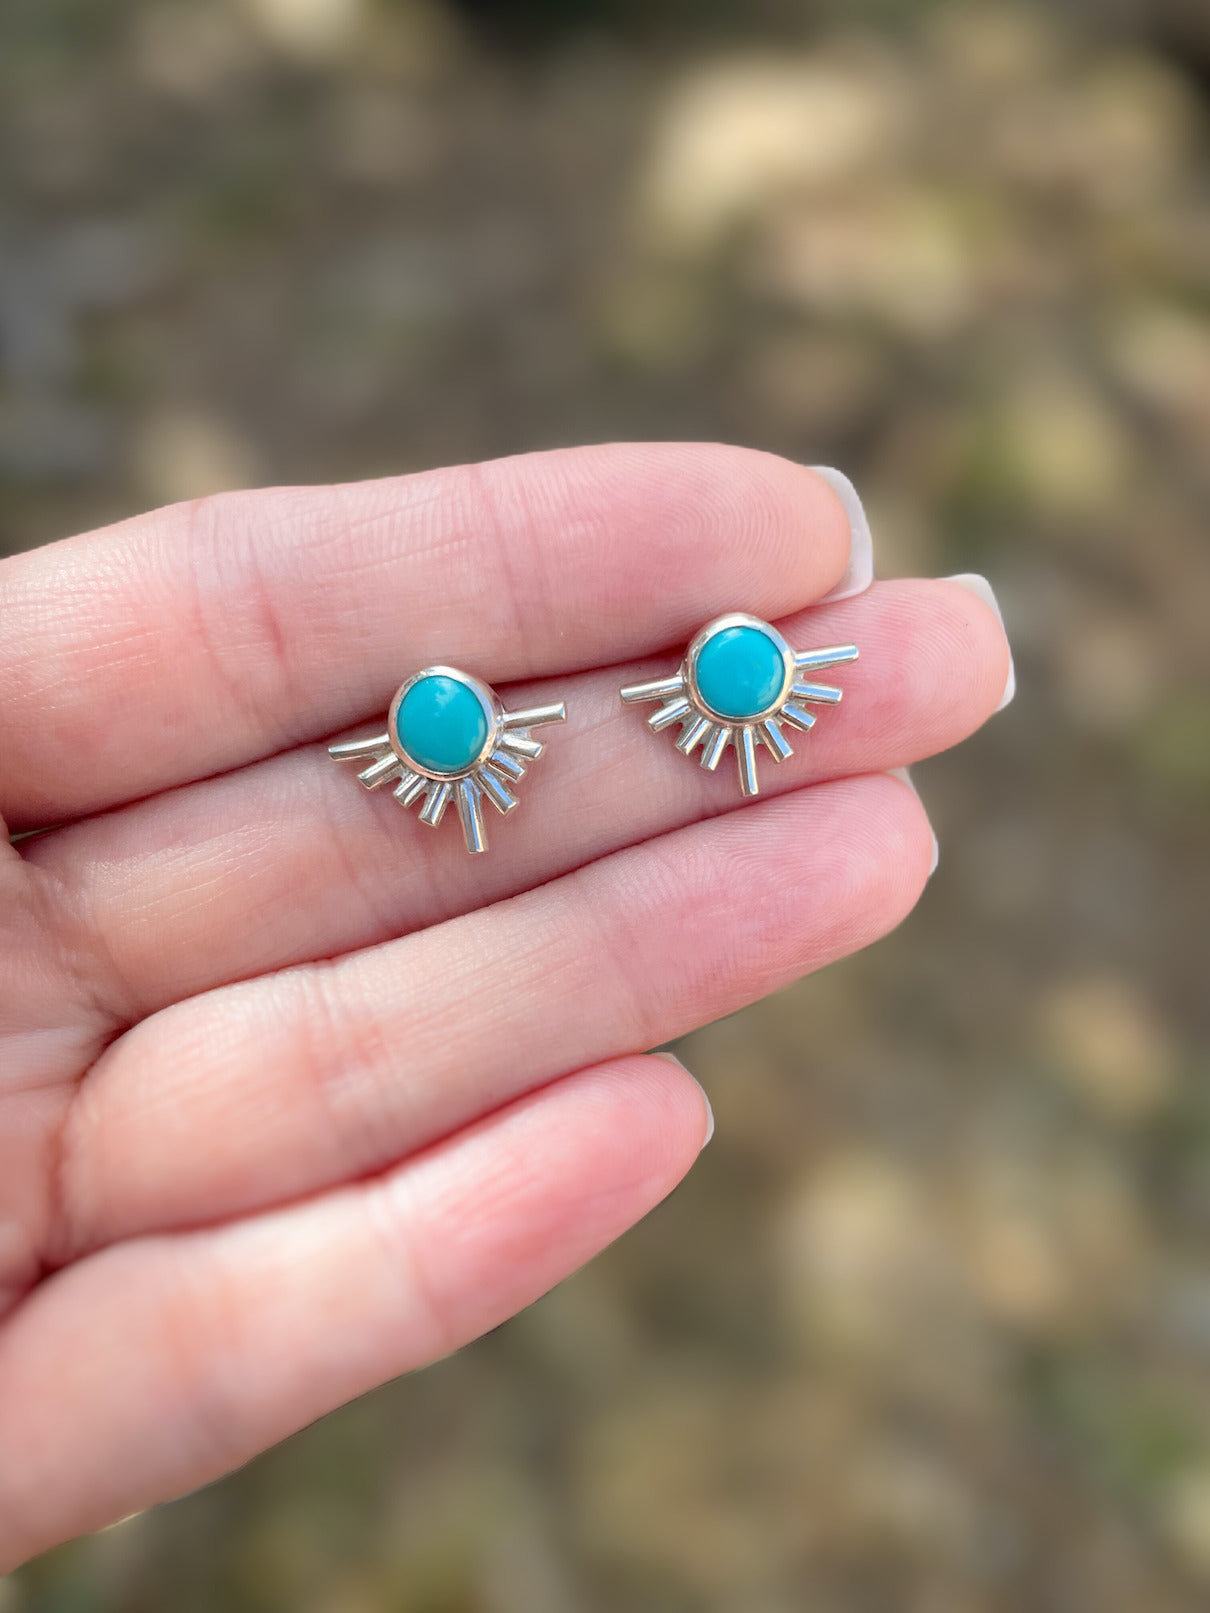 Sterling silver starburst turquoise stud earrings held in hand outdoors in natural light.